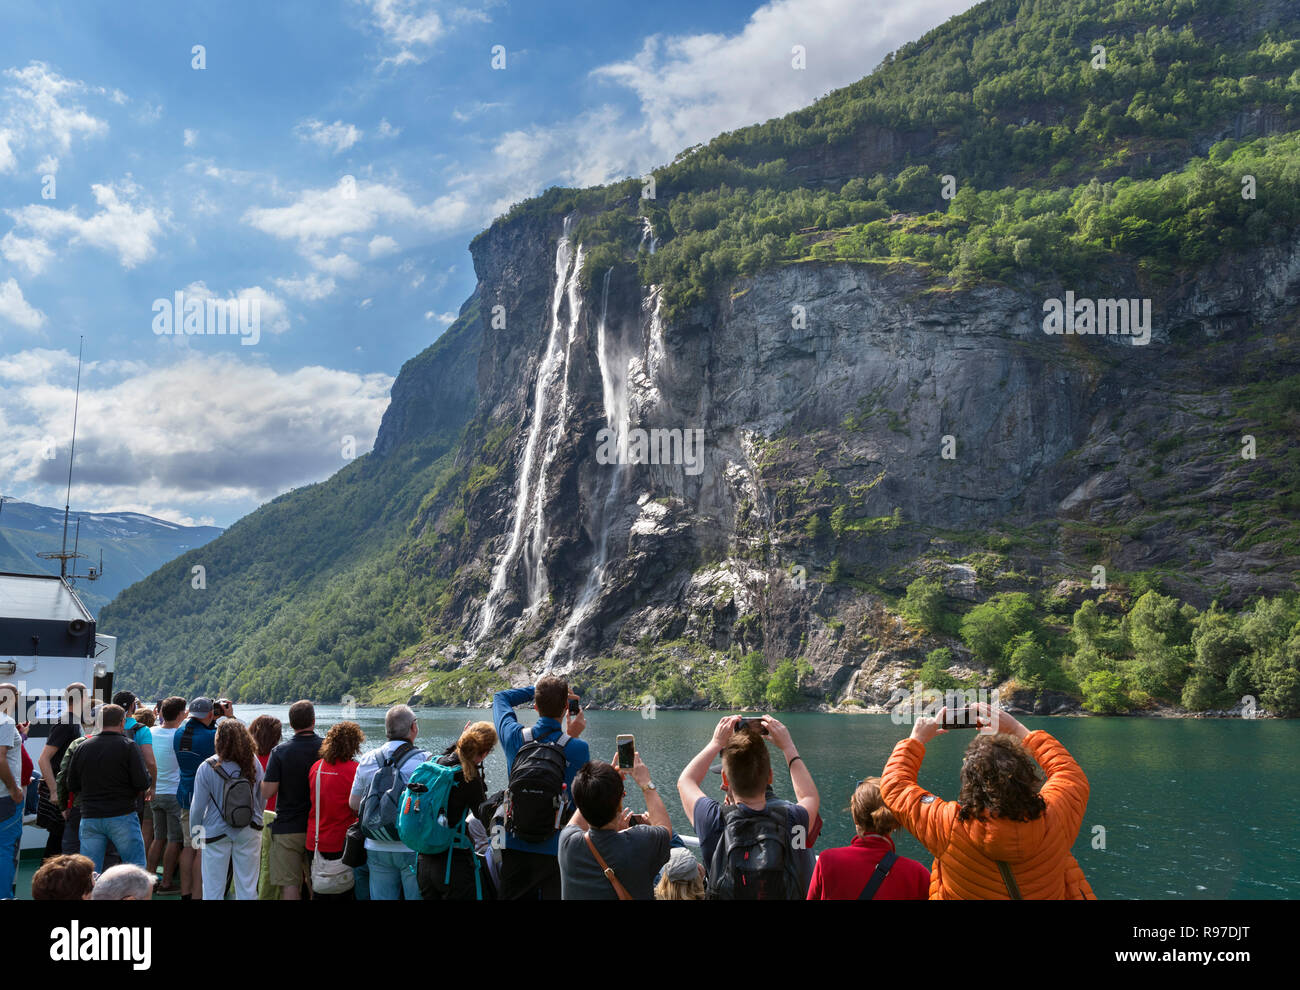 Tourists taking photographs of a waterfall from the deck of the Geiranger to Hellesylt Ferry, Geirangerfjord, Norway Stock Photo